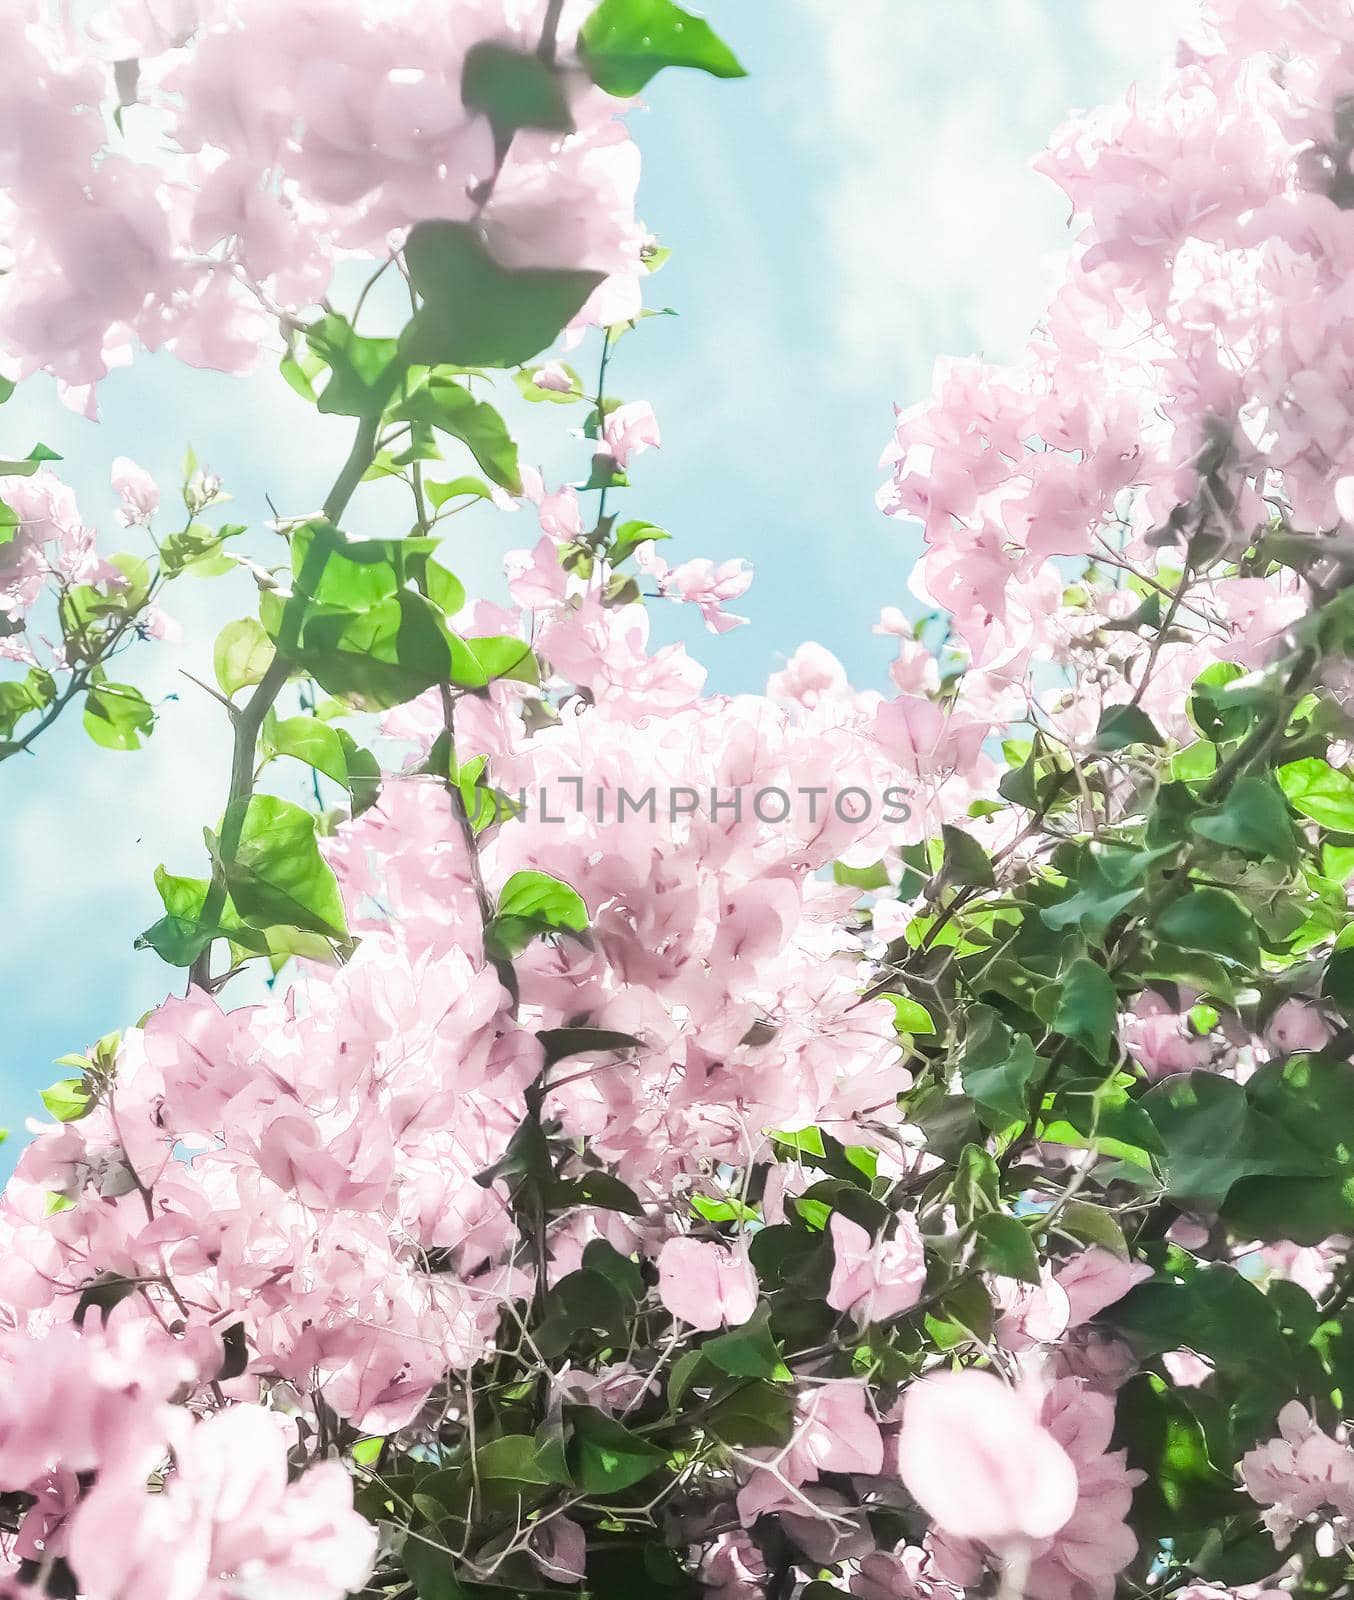 Pastel pink blooming flowers and blue sky in a dream garden, floral background by Anneleven